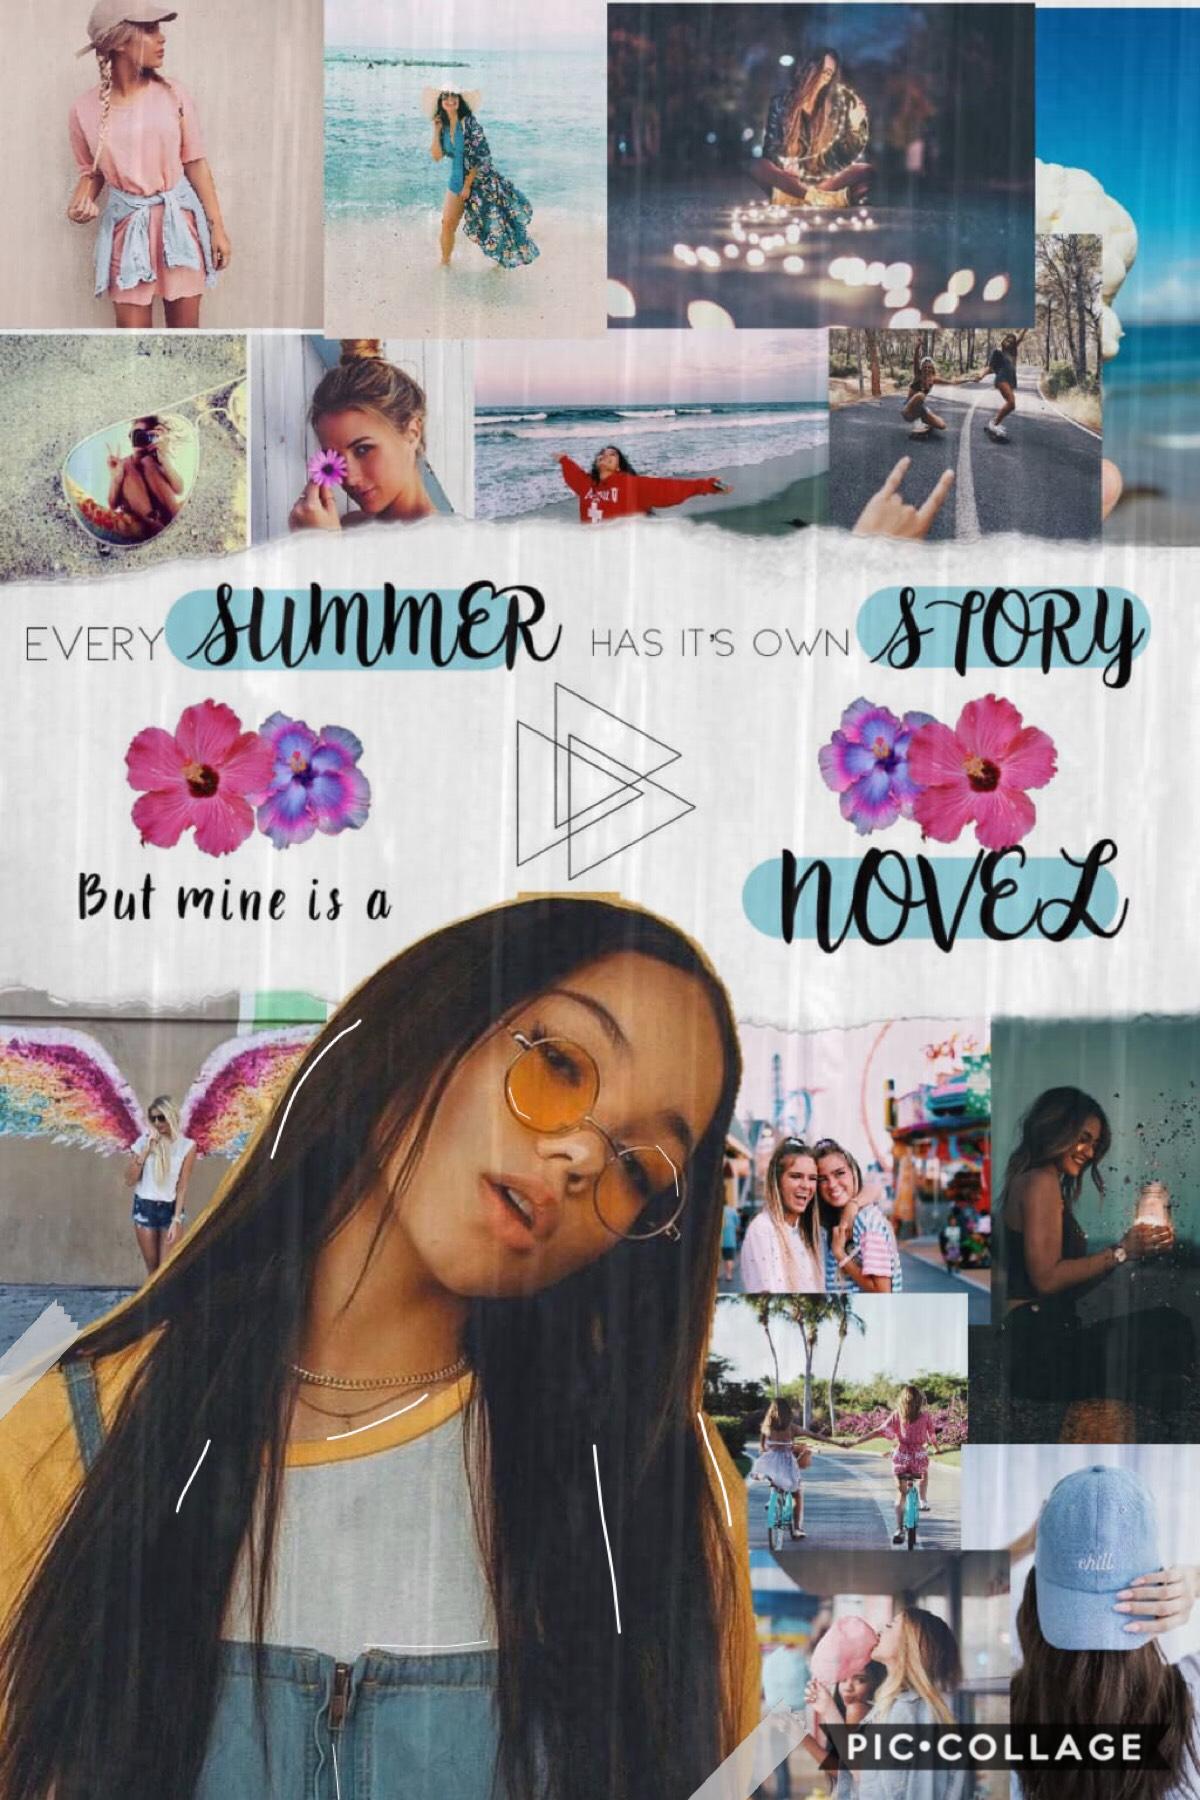 TAP

Hey guys sorry I haven’t been very active. I was looking thru my acc and saw this collage it’s probably my fav one! I decided to make a few changes and repost it! I hope u all like it! ~wild_luv~